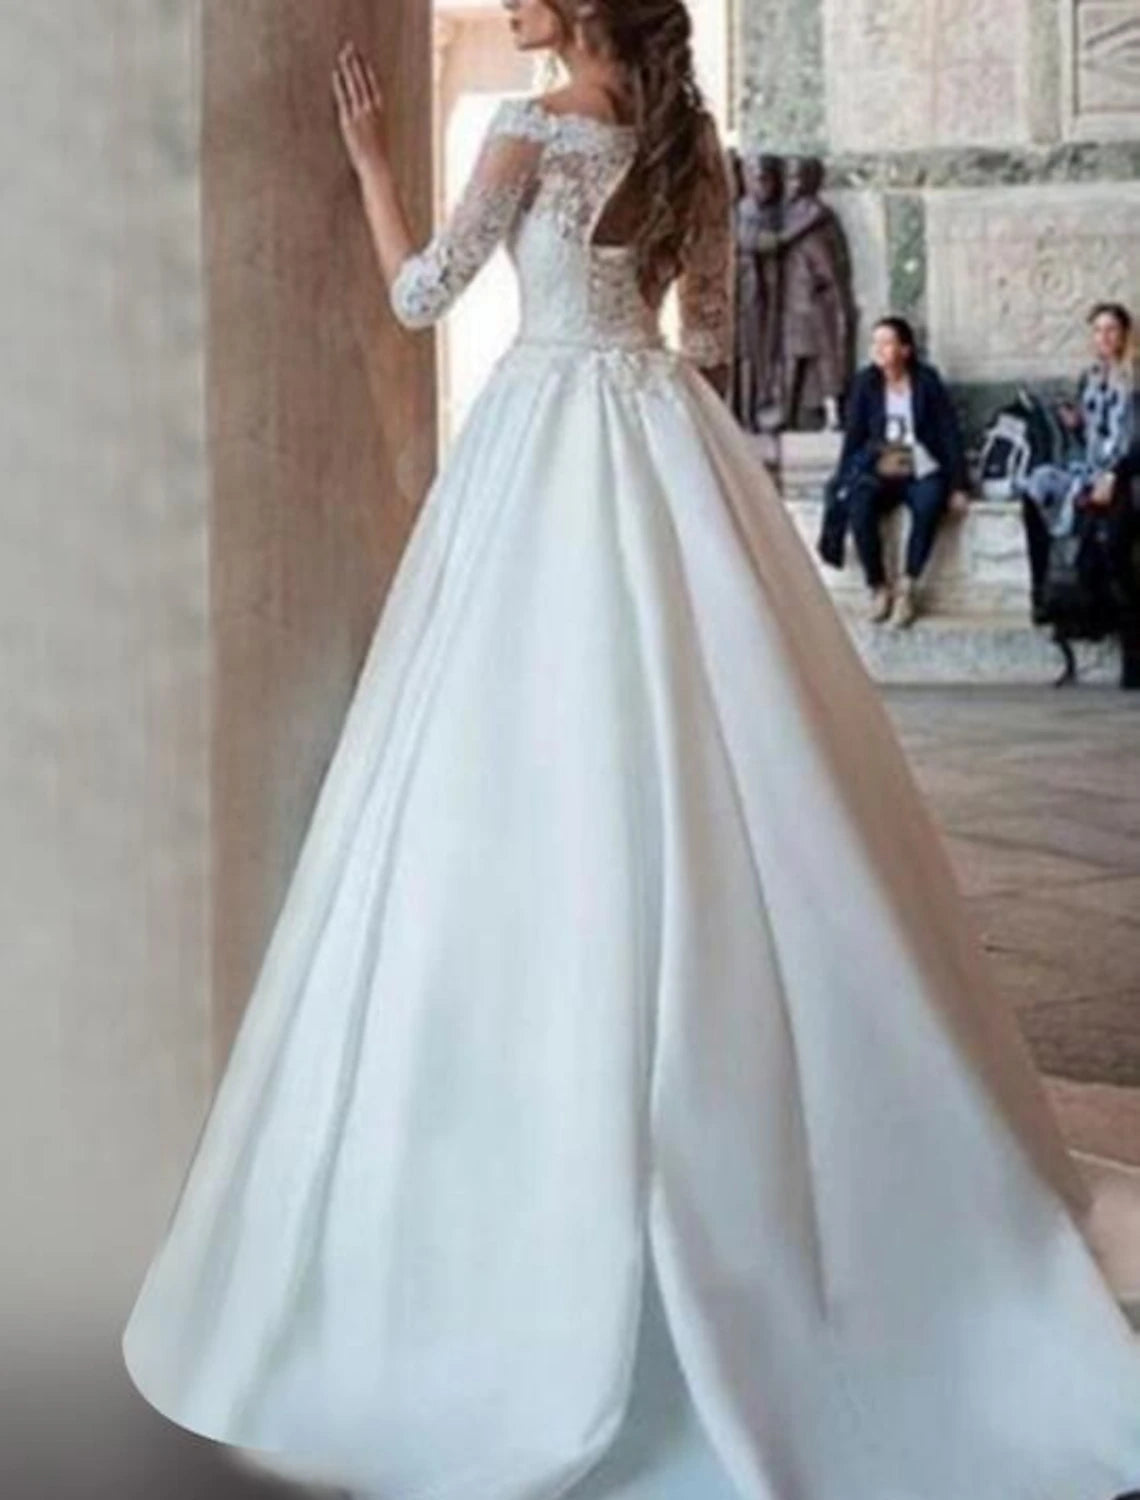 Engagement Formal Wedding Dresses Ball Gown Off Shoulder Half Sleeve Sweep / Brush Train Satin Bridal Gowns With Pleats Appliques